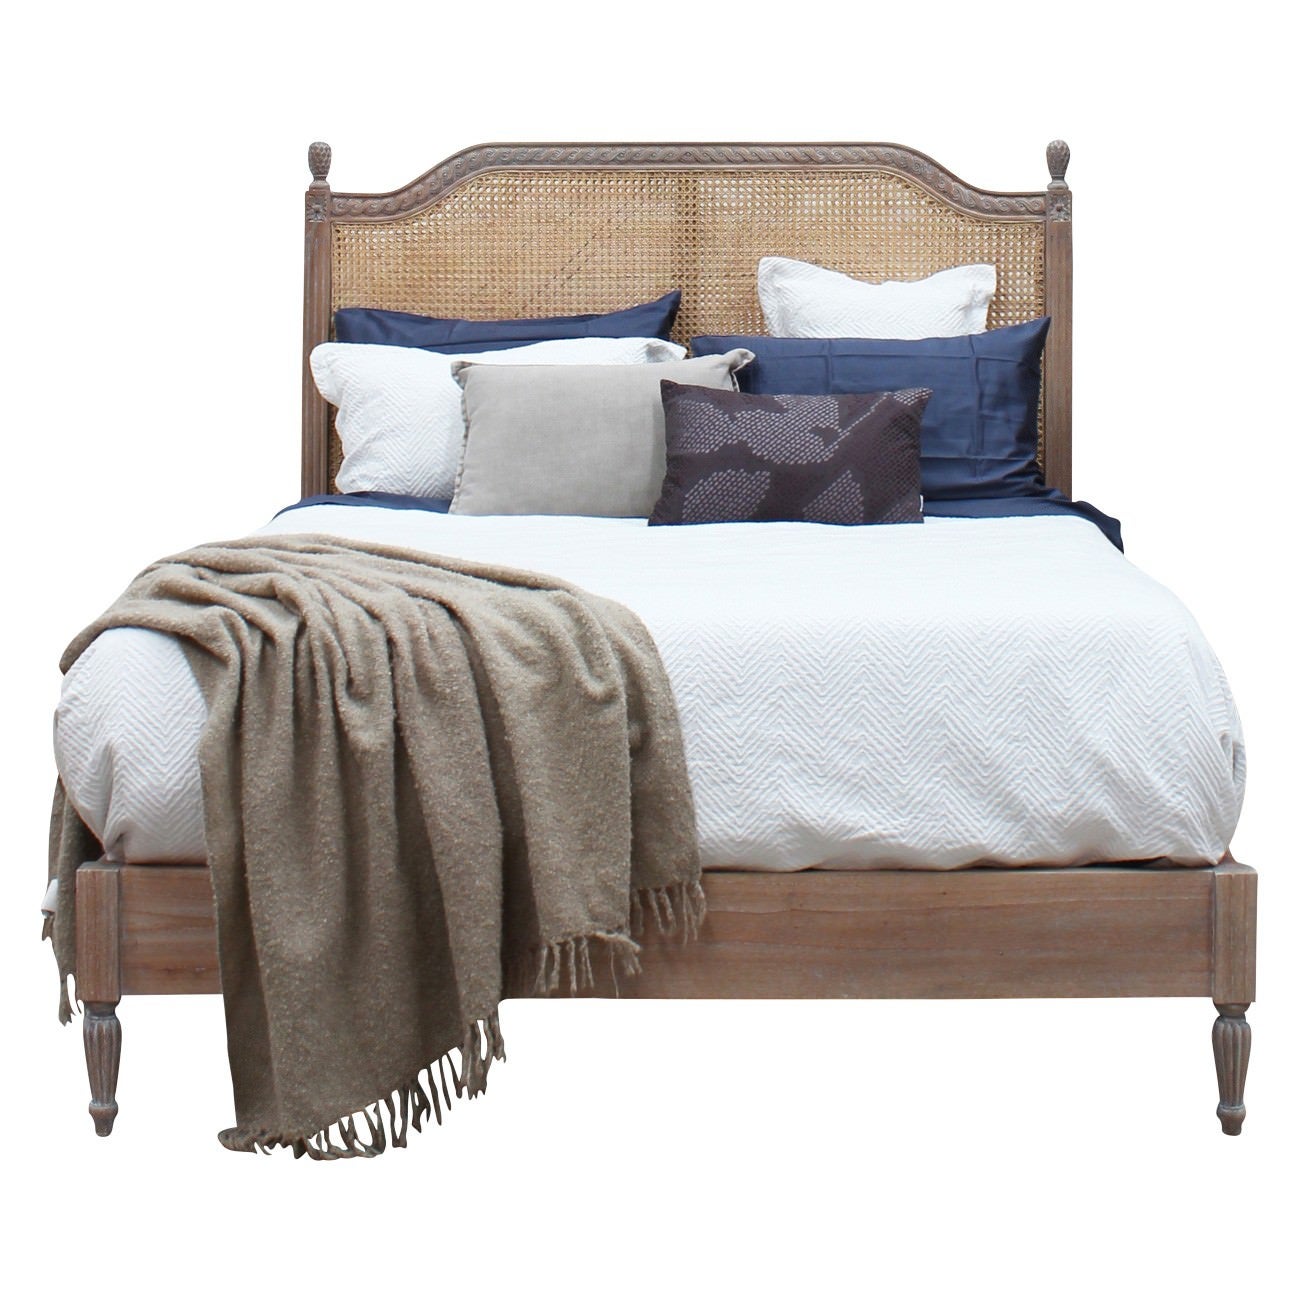 Lapalisse Handcrafted Mind Wood & Rattan Bed, King, Weathered Oak